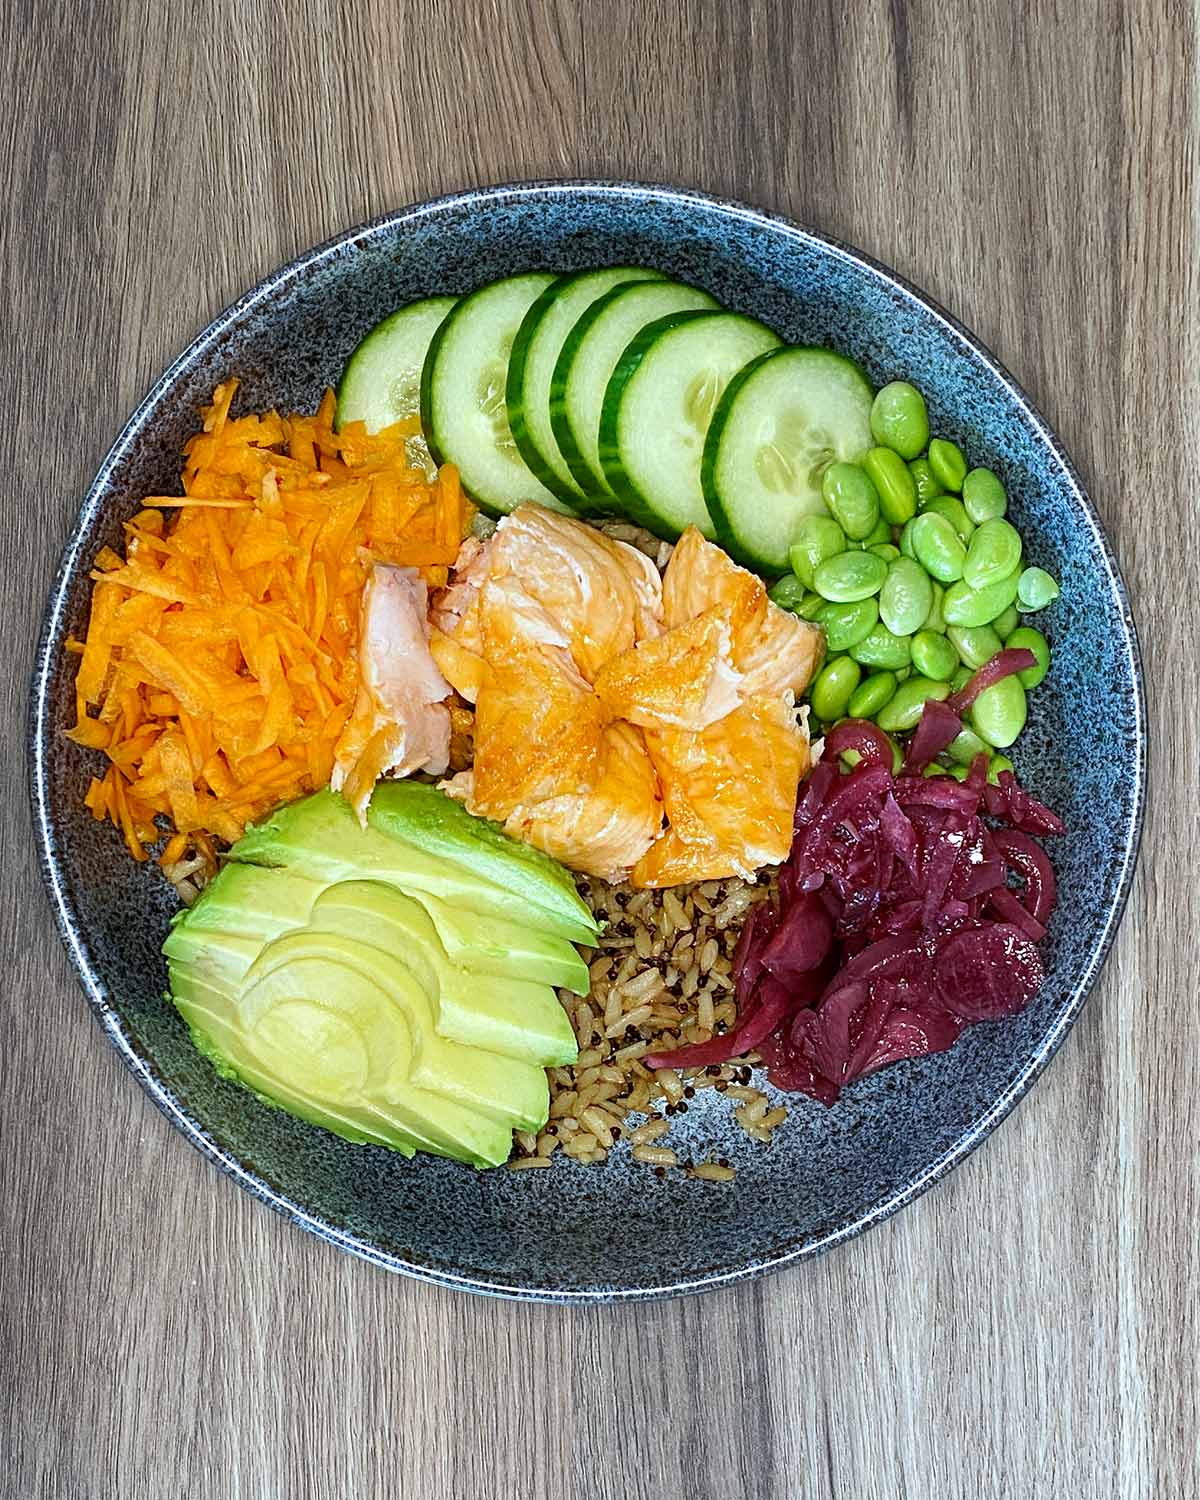 Salmon, cucumber, carrot, onions, beans and avocado added to the bow,.